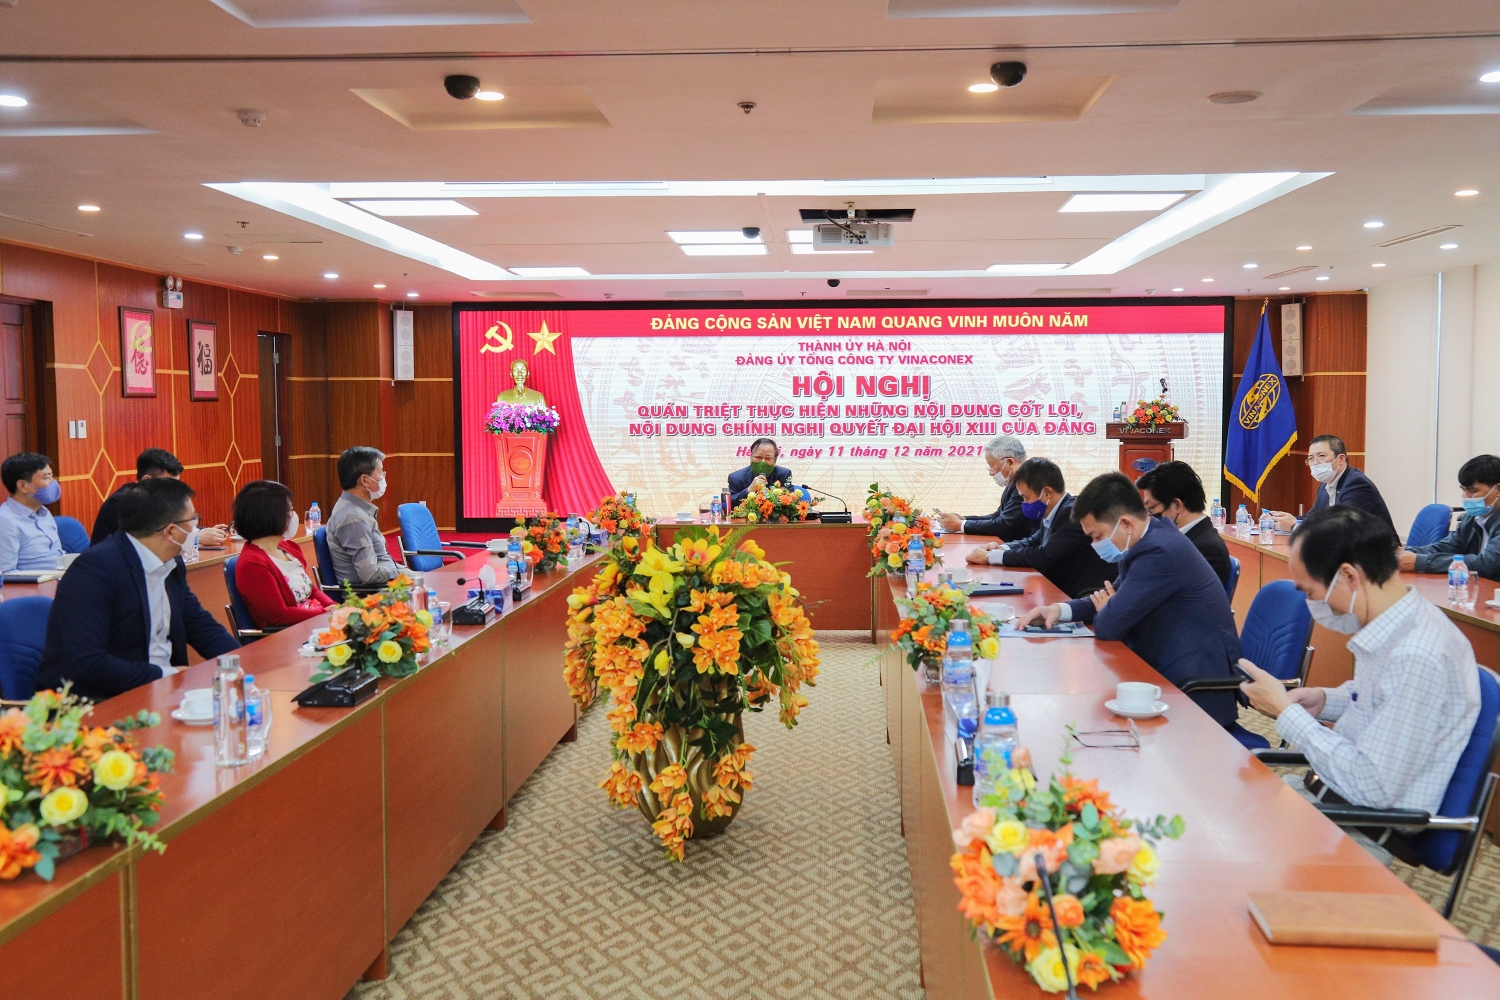 CONFERENCE ON THOROUGHLY GRASPING AND REALIZING THE 13TH NATIONAL PARTY CONGRESS’ RESOLUTION